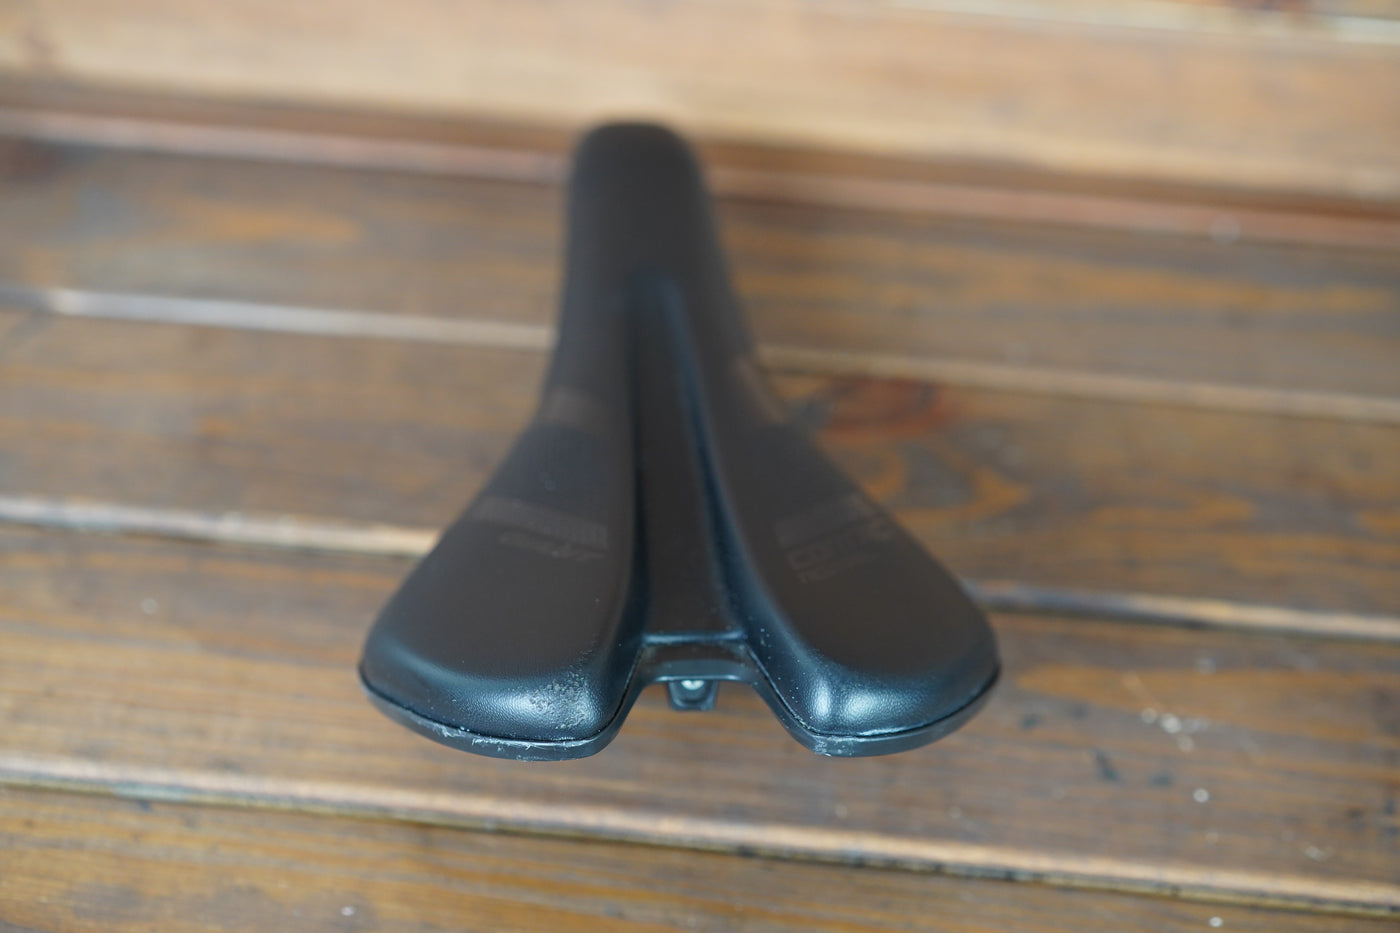 Giant Contact Neutral Road Saddle 297g